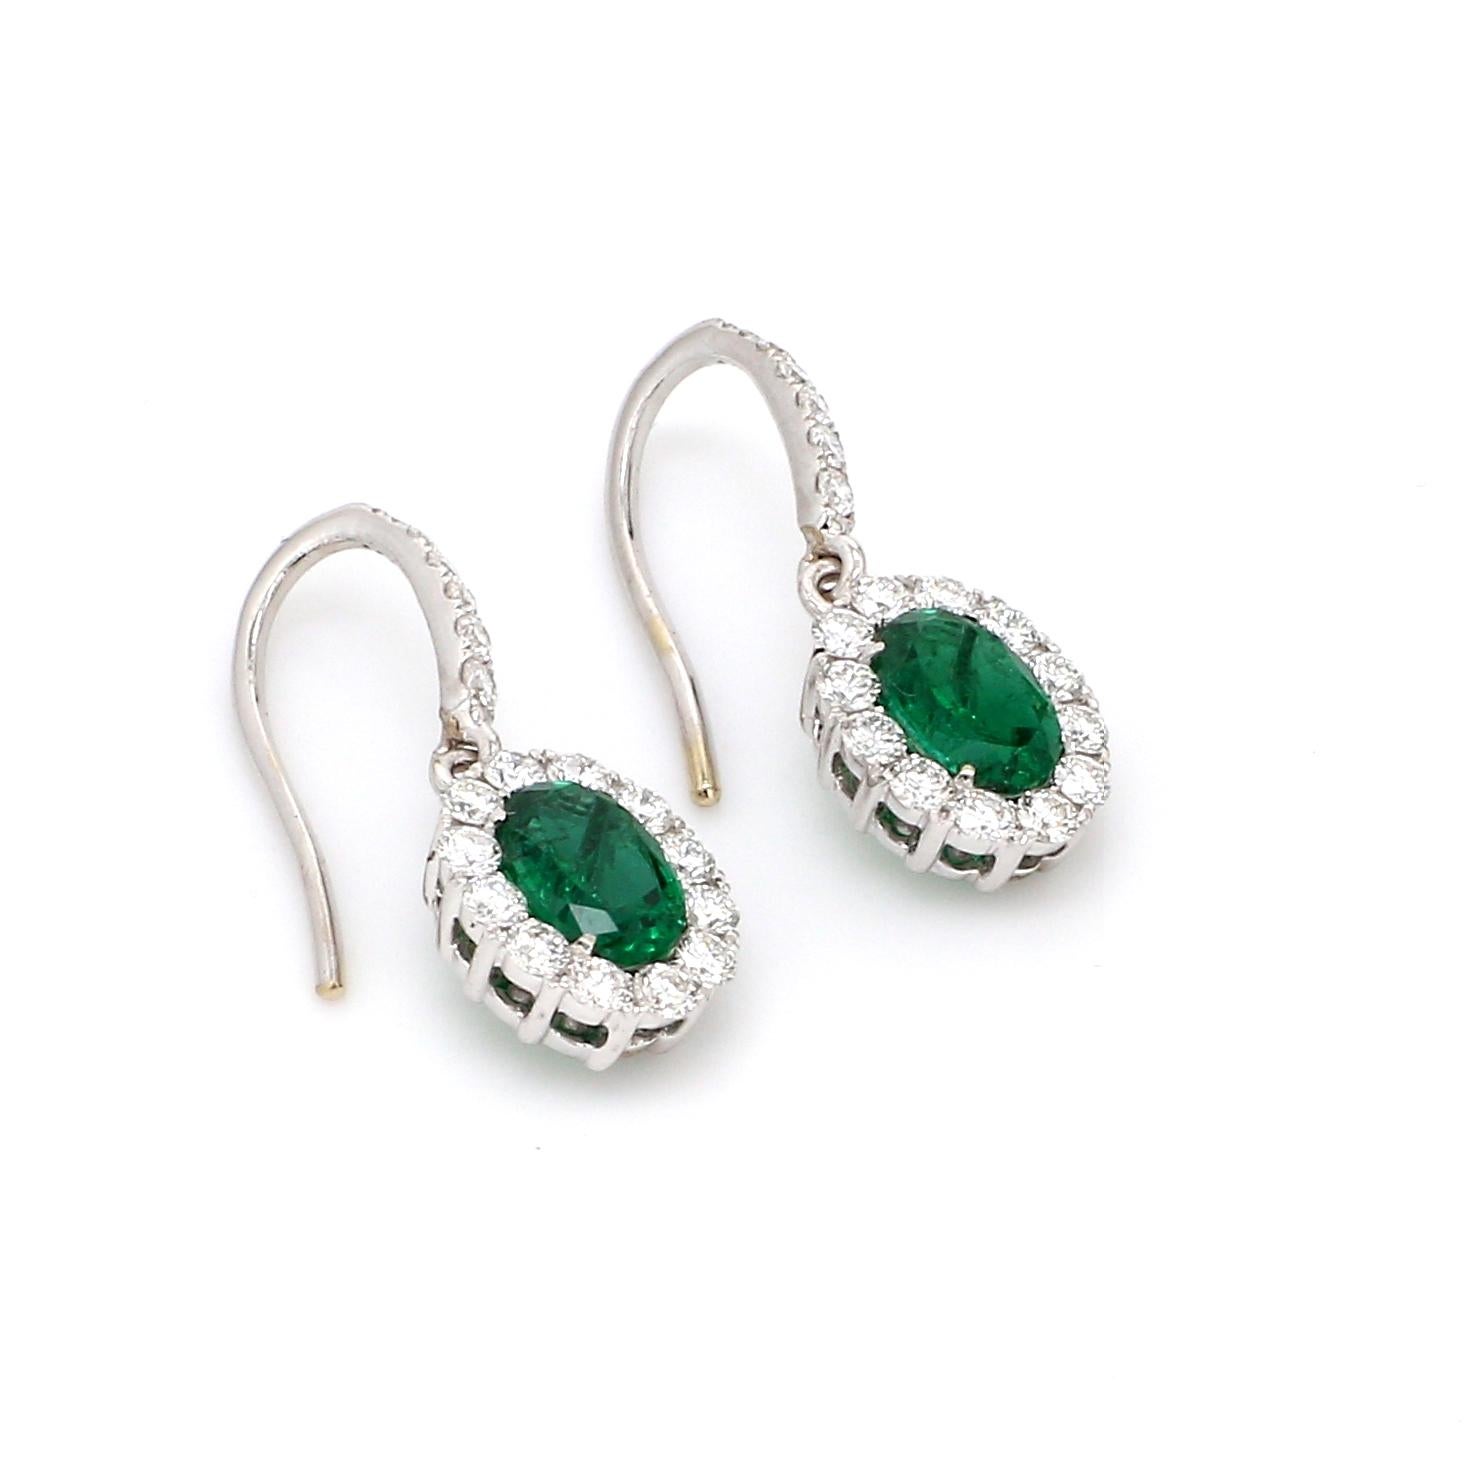 A Beautiful Handcrafted Emerald Earring in 18 karat White Gold with Natural No Treated Emeralds and  Natural Brilliant Cut Colorless Diamonds. A Statement piece for Evening Wear

Emerald Details
Pieces : 2 Pieces Oval Shape
Weight : 1.54 Carat